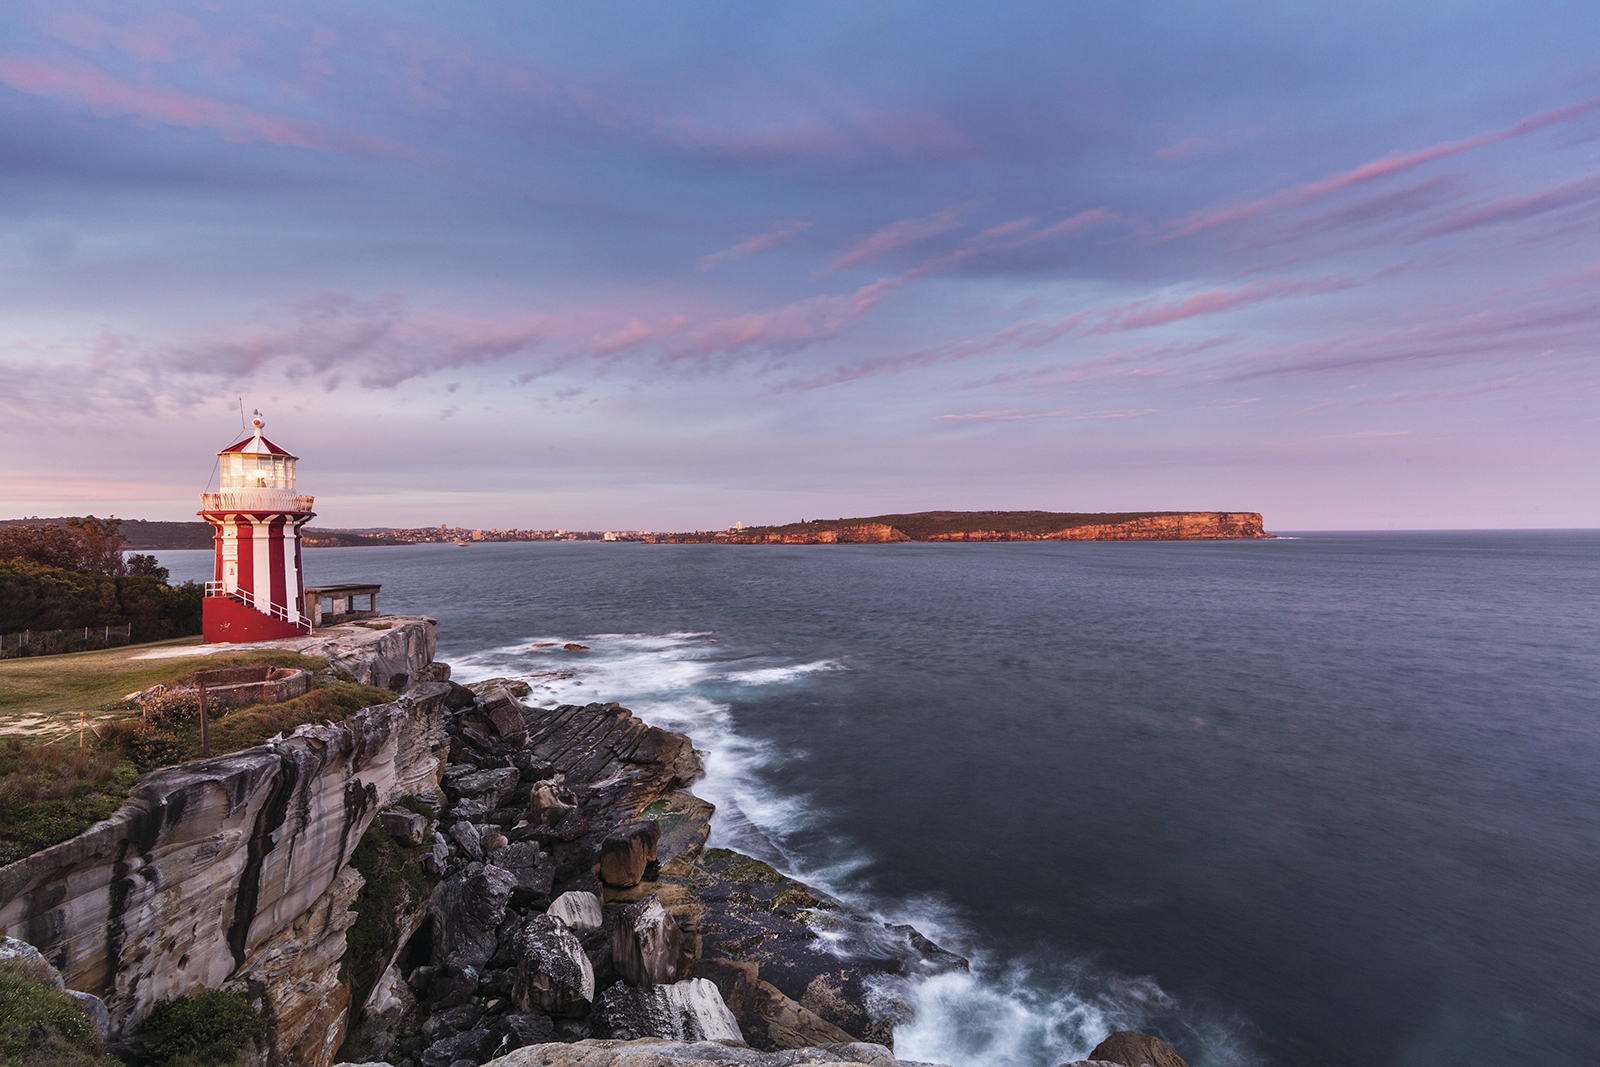 Sunrise view from Hornby Lighthouse at South Head, Sydney Harbour National Park. Photo Credit: David Finnegan/DPIE